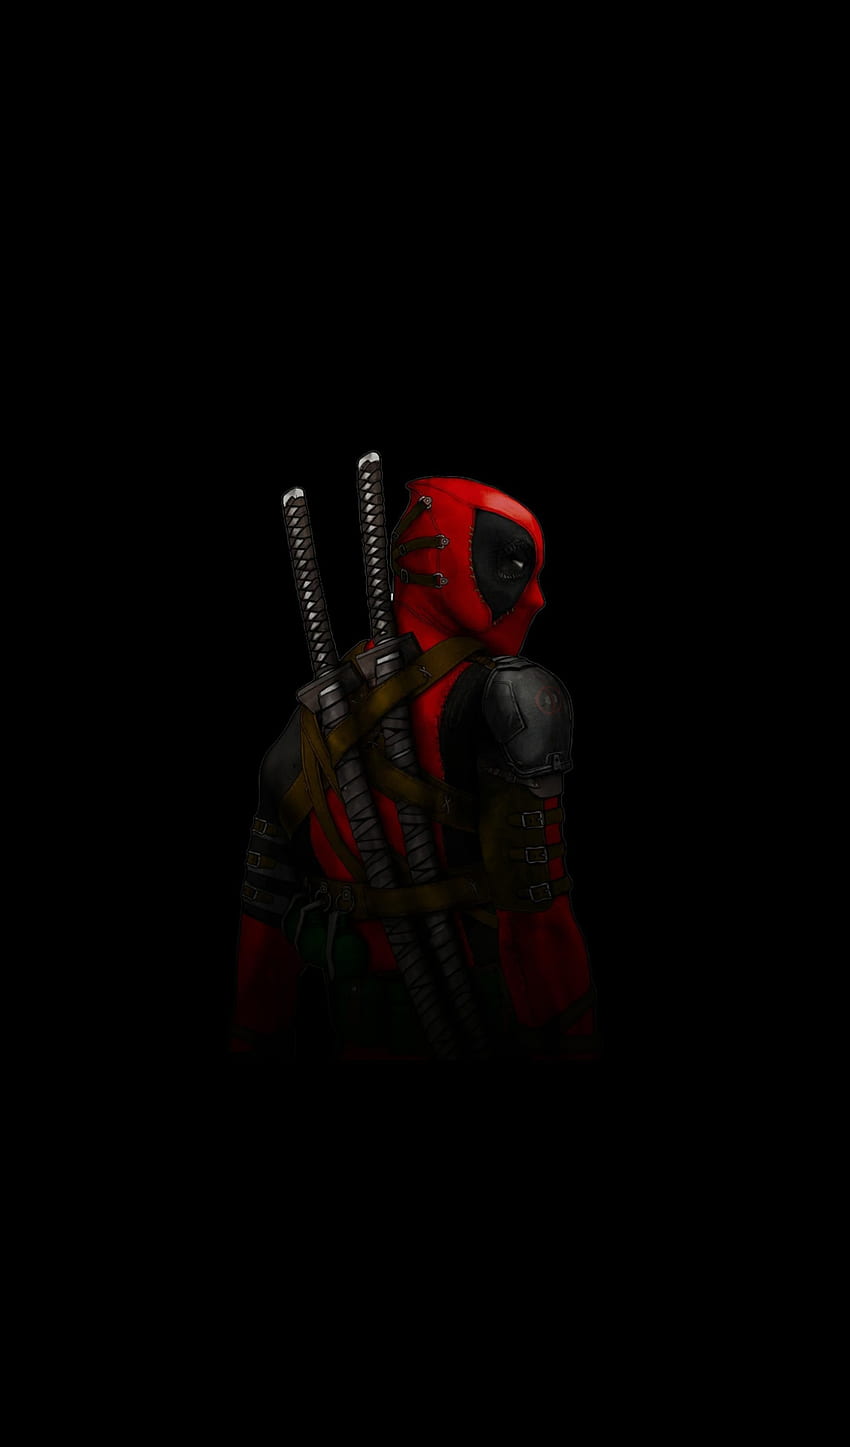 Cool Deadpool Wallpaper with Red Abstract Mask with White Eyes on Dark  Background - Allpicts | Deadpool wallpaper, Superhero wallpaper, Deadpool  logo wallpaper